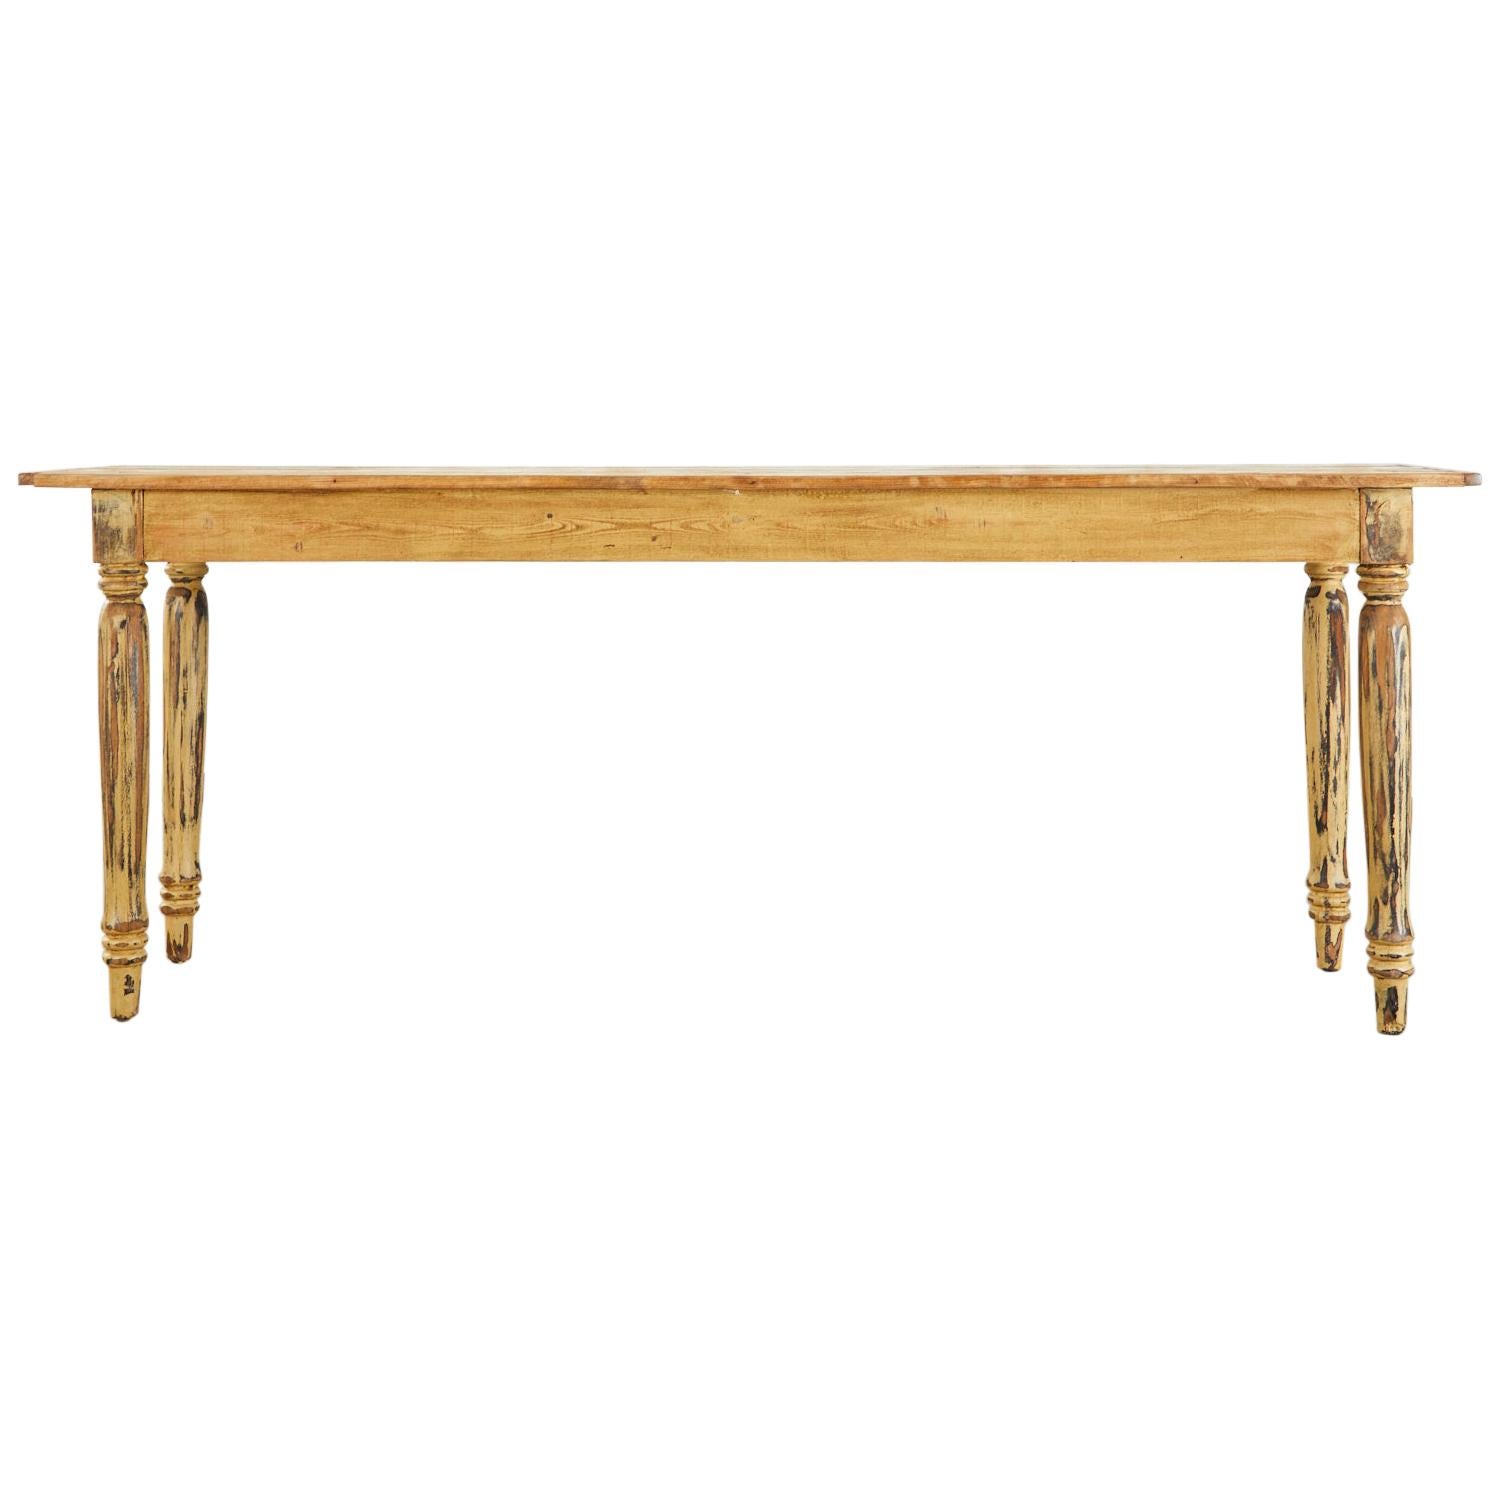 American Country Painted Pine Farmhouse Harvest Table